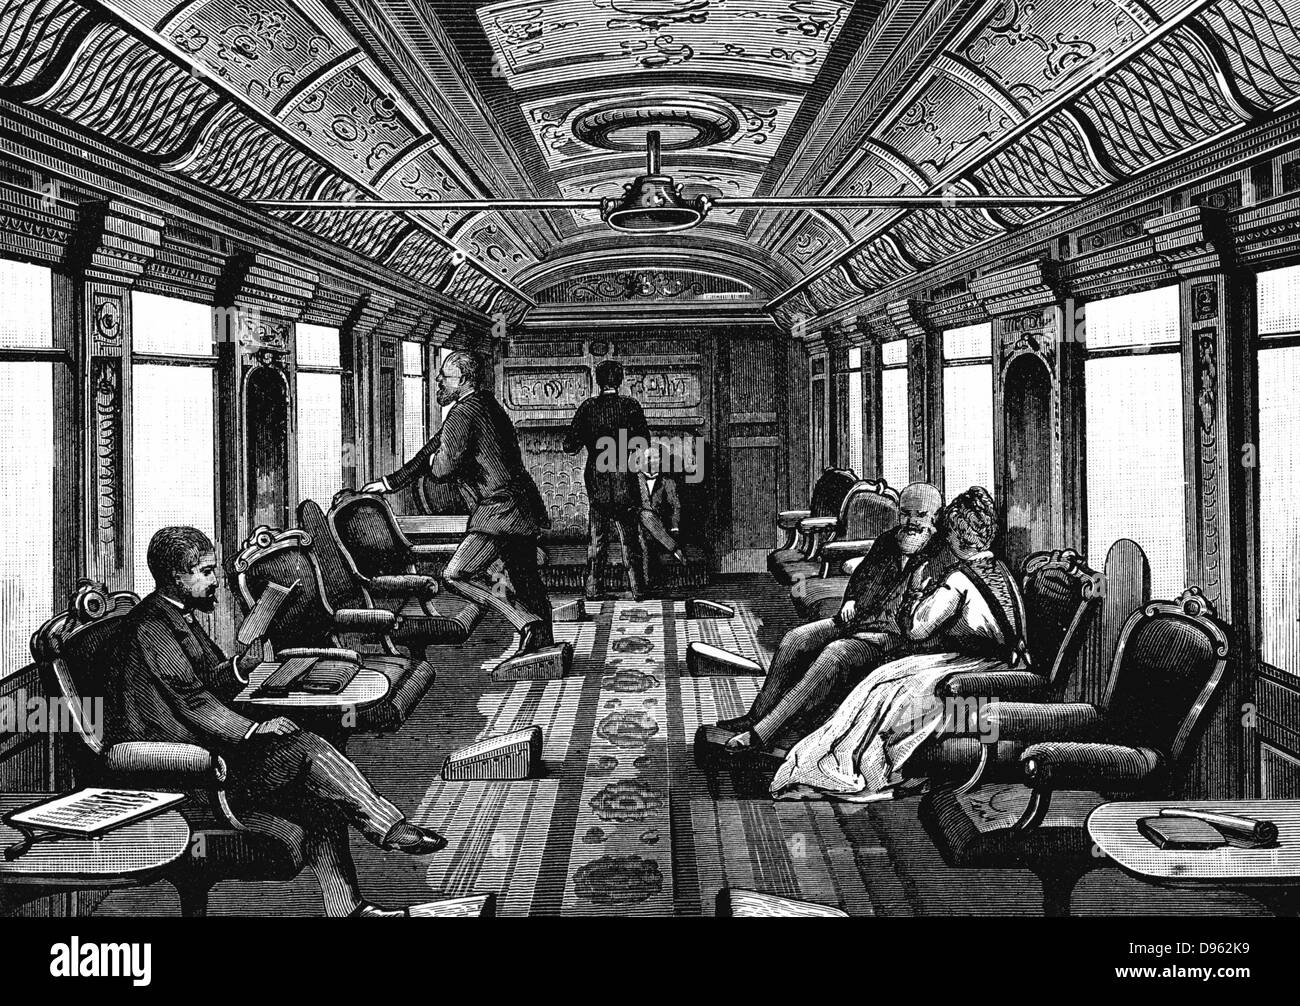 Saloon car on the Orient Express. Wood engraving published Leipzig c1895. Stock Photo